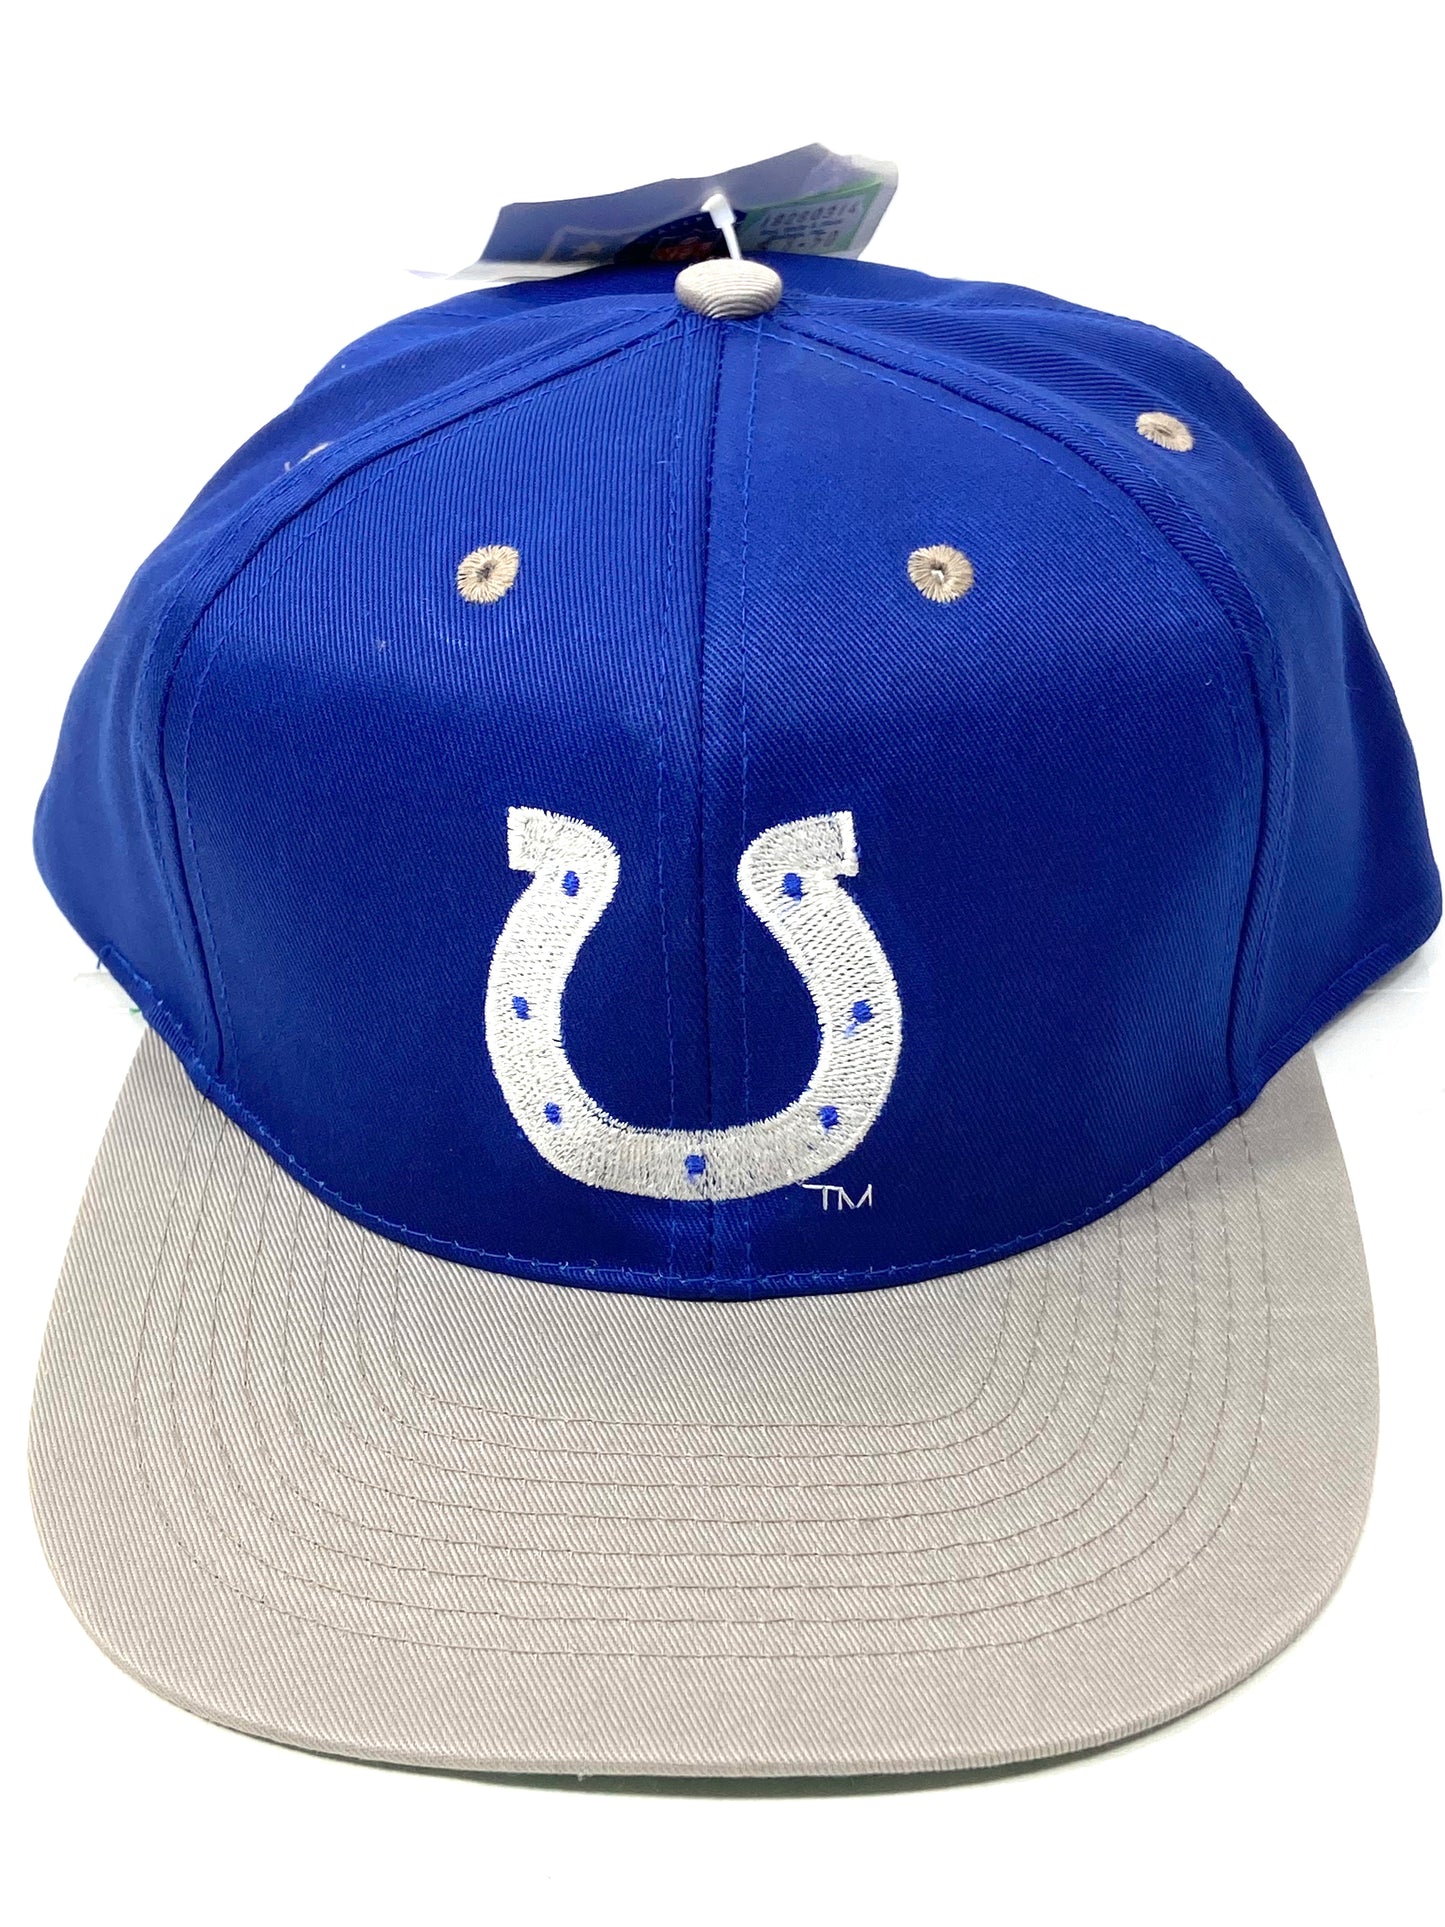 Indianapolis Colts Vintage NFL Team Color Replic Snapback by Drew Pearson Marketing